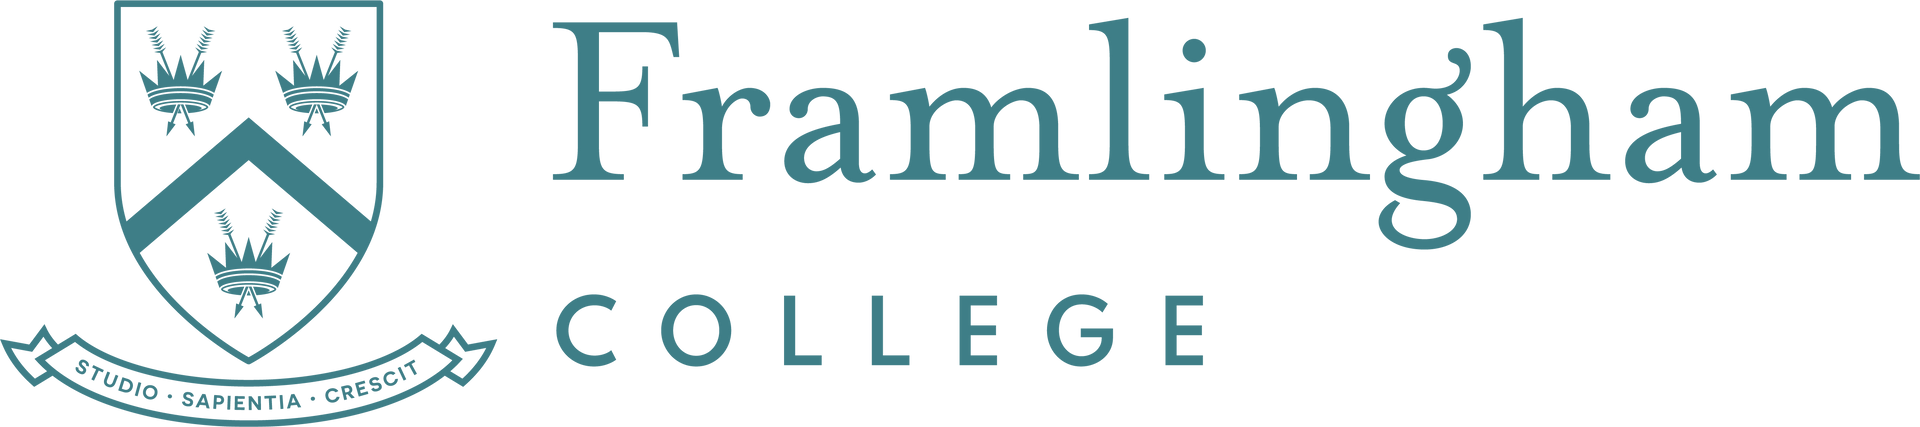 A logo for framingham college with a coat of arms